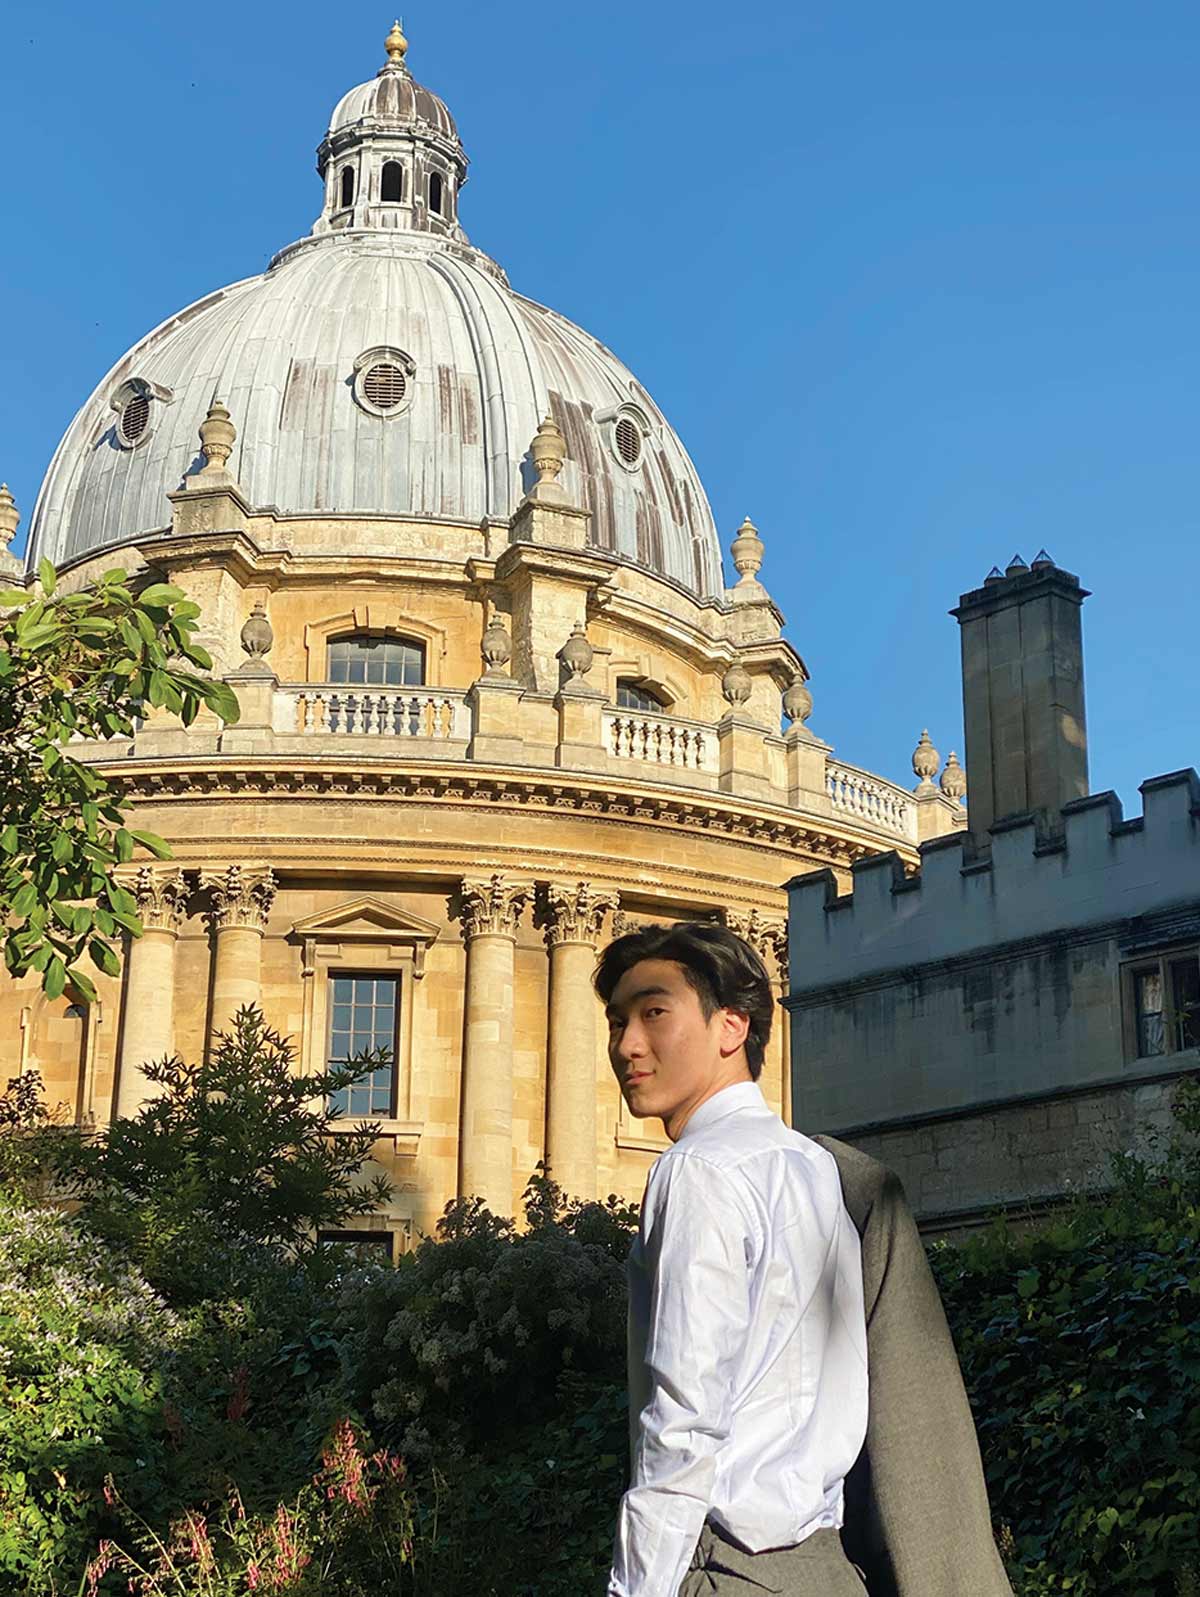 Yifan Ping stands in front of an old building on a sunny day.